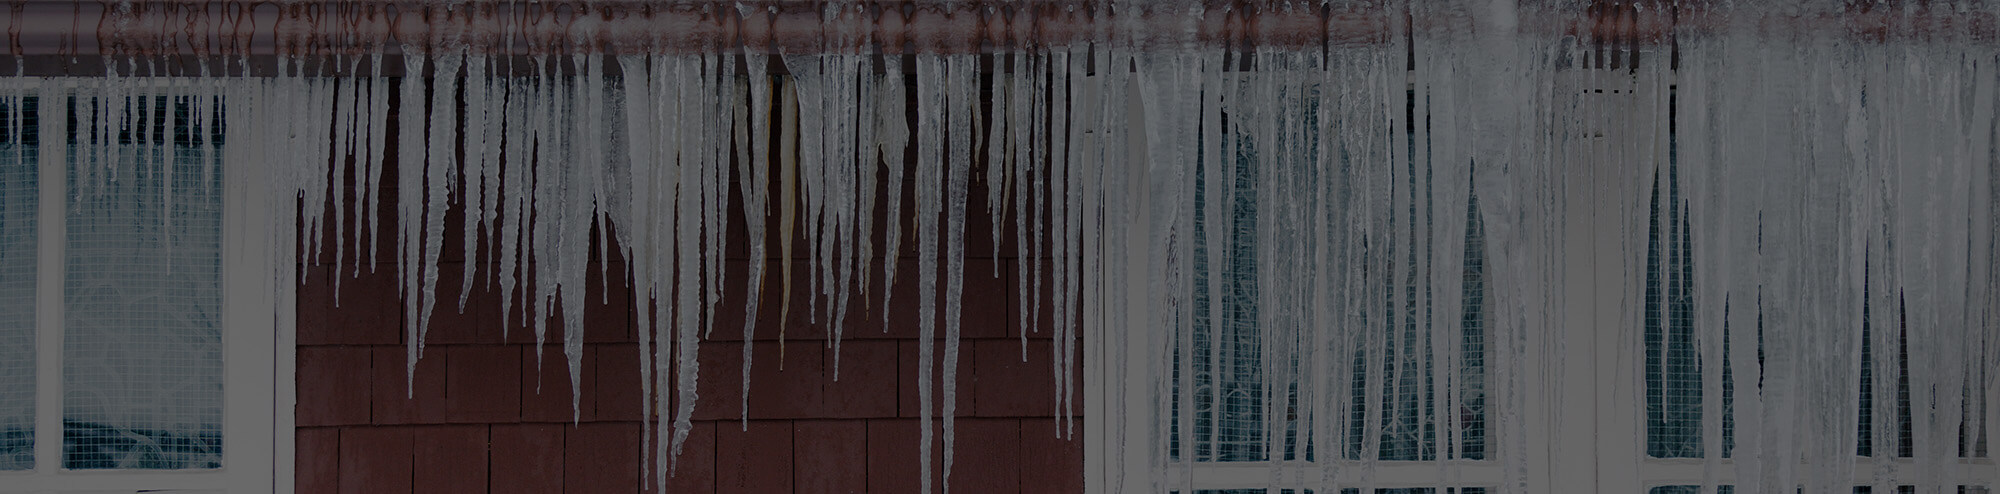 Winterization roofing services in Green Bay area